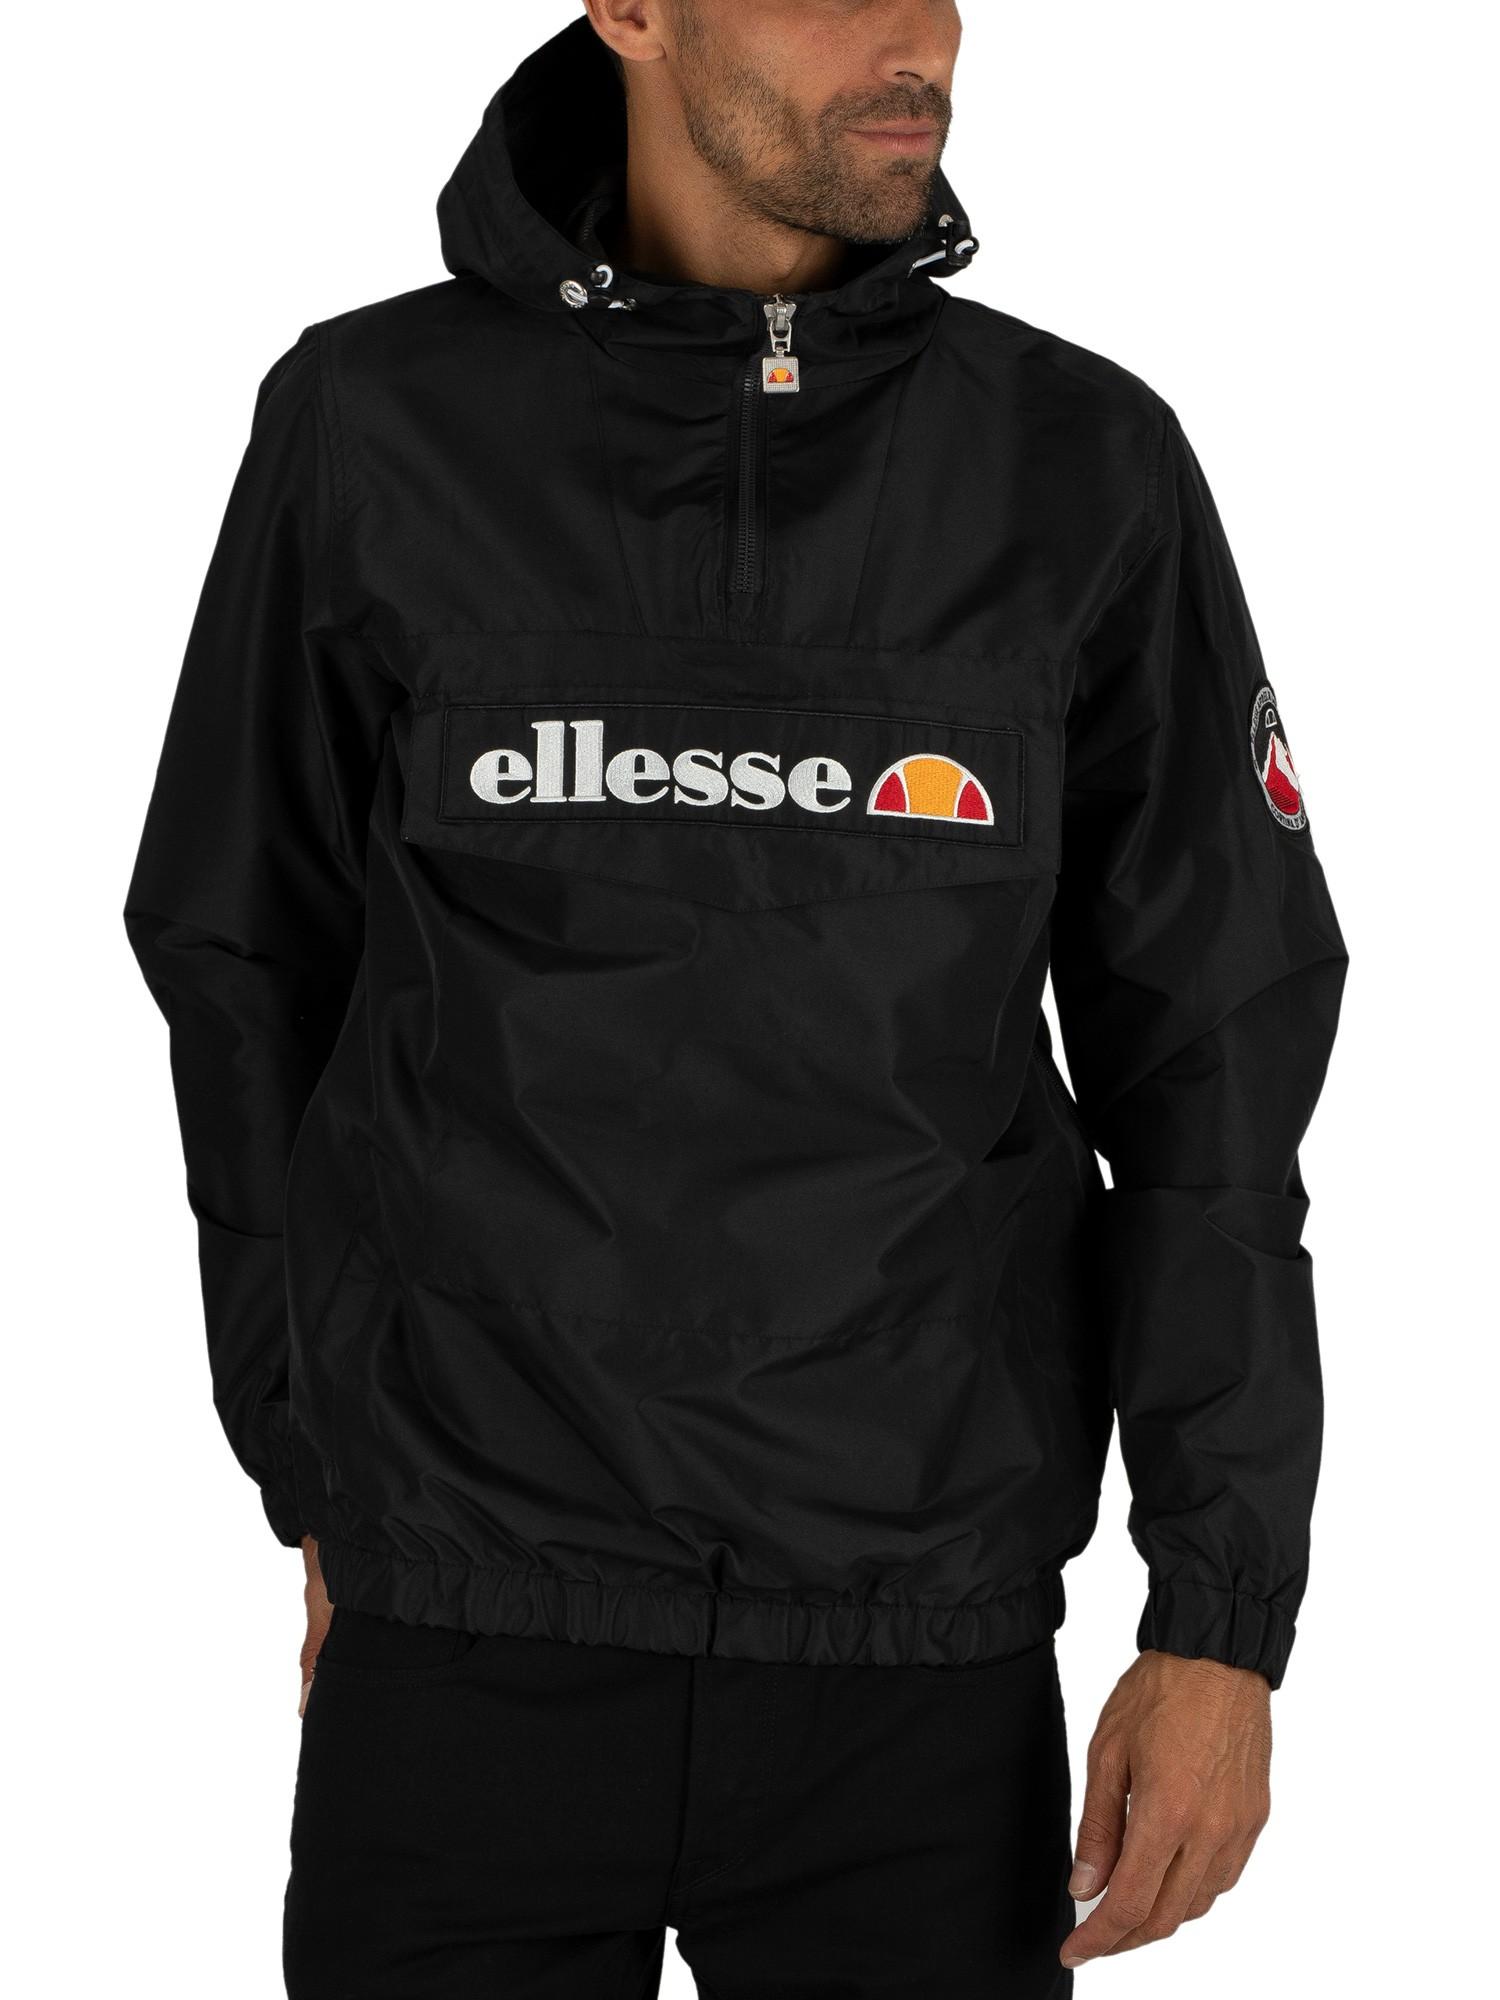 ellesse Mens Mont 2 Overhead Jacket Hooded Casual Anorak Pull Over Navy Blue